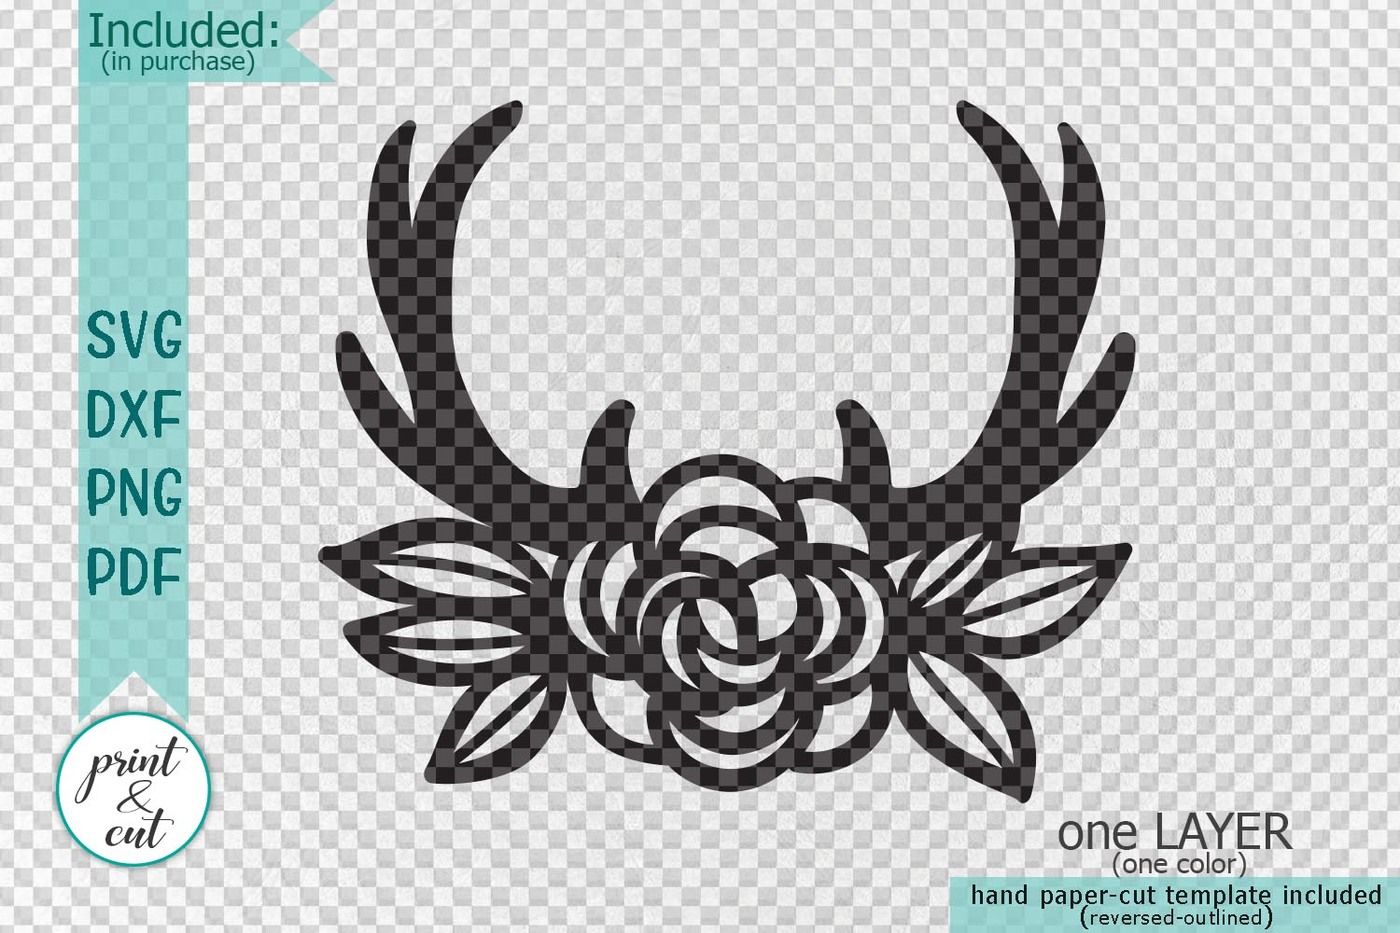 Download Floral Deer Antlers Laser Cut Papercutting Template Svg Dxf Pdf By Kartcreation Thehungryjpeg Com